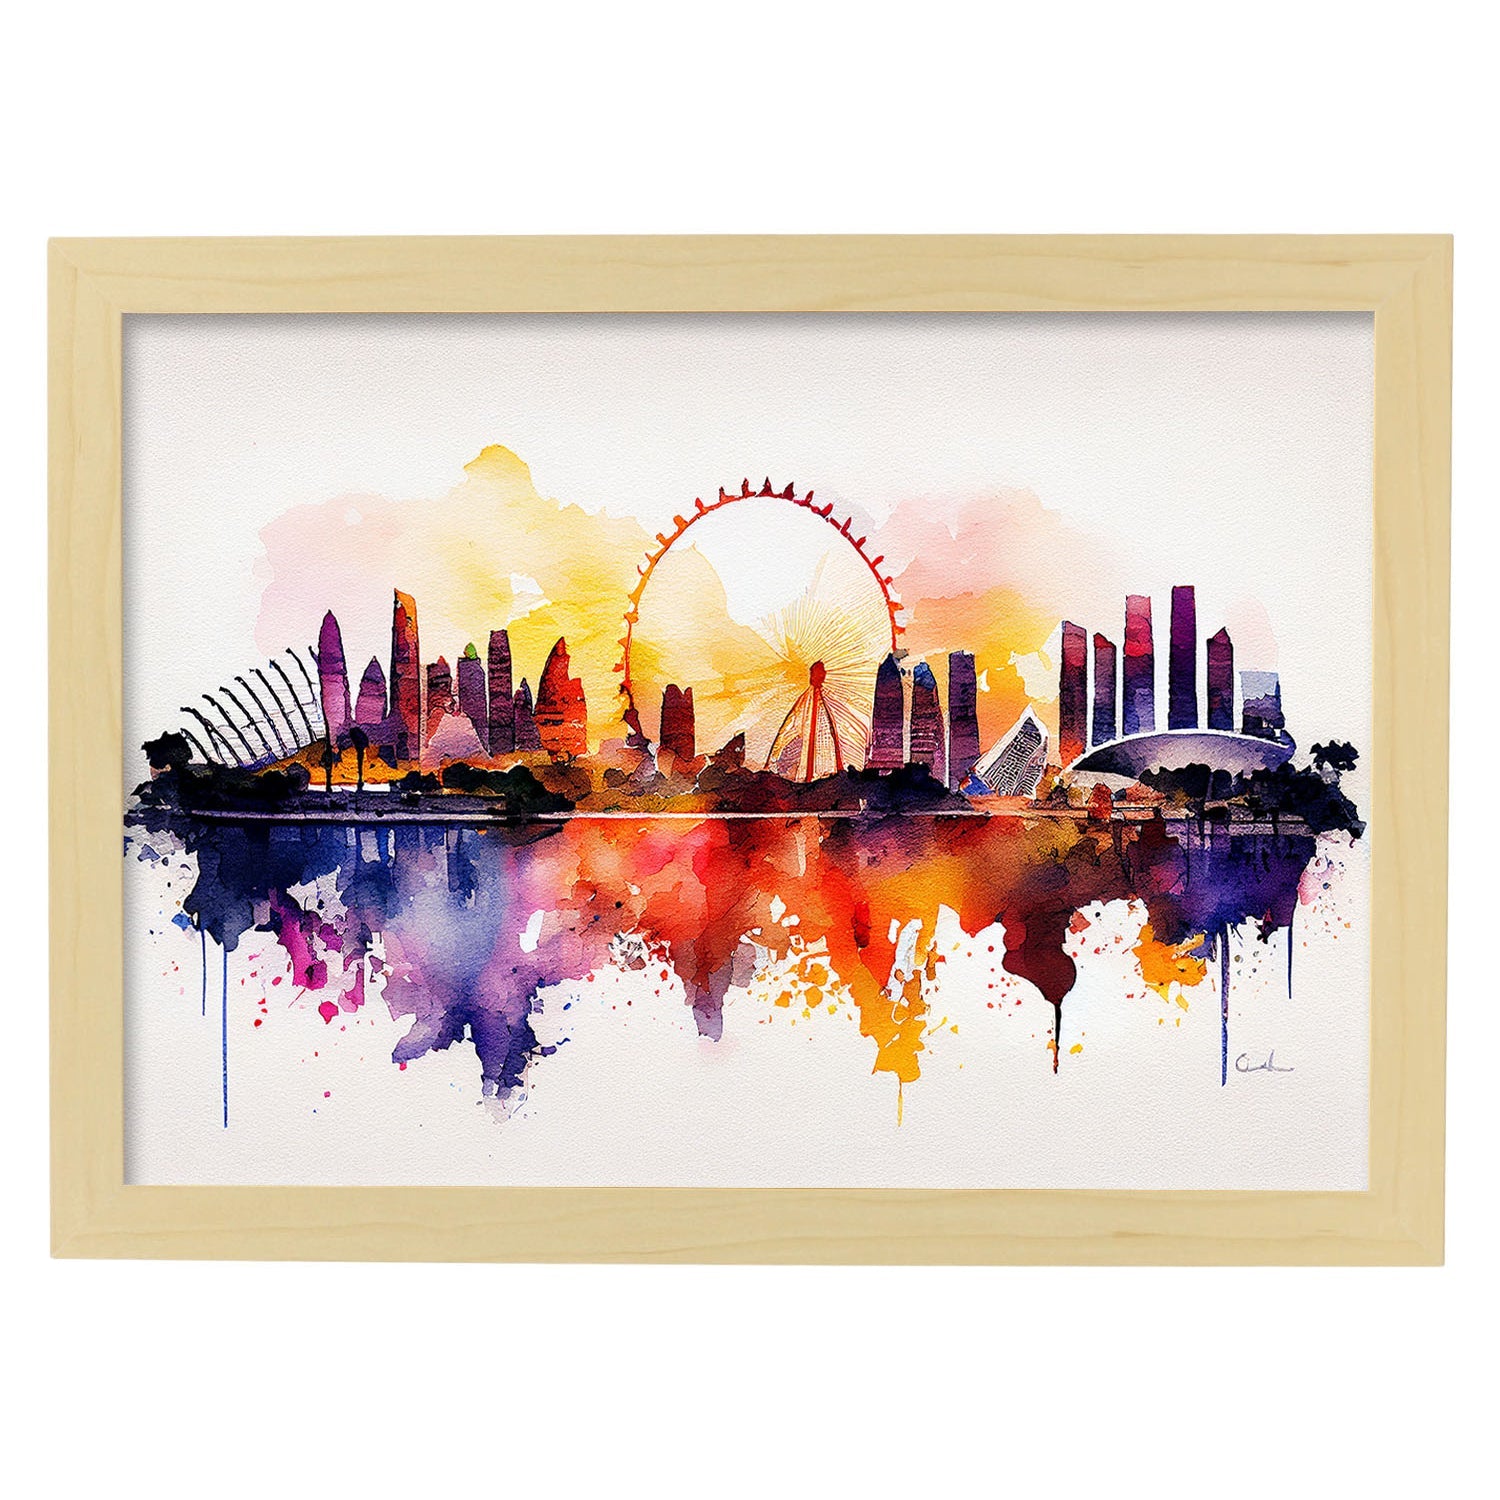 Nacnic watercolor of a skyline of the city of Singapore_3. Aesthetic Wall Art Prints for Bedroom or Living Room Design.-Artwork-Nacnic-A4-Marco Madera Clara-Nacnic Estudio SL